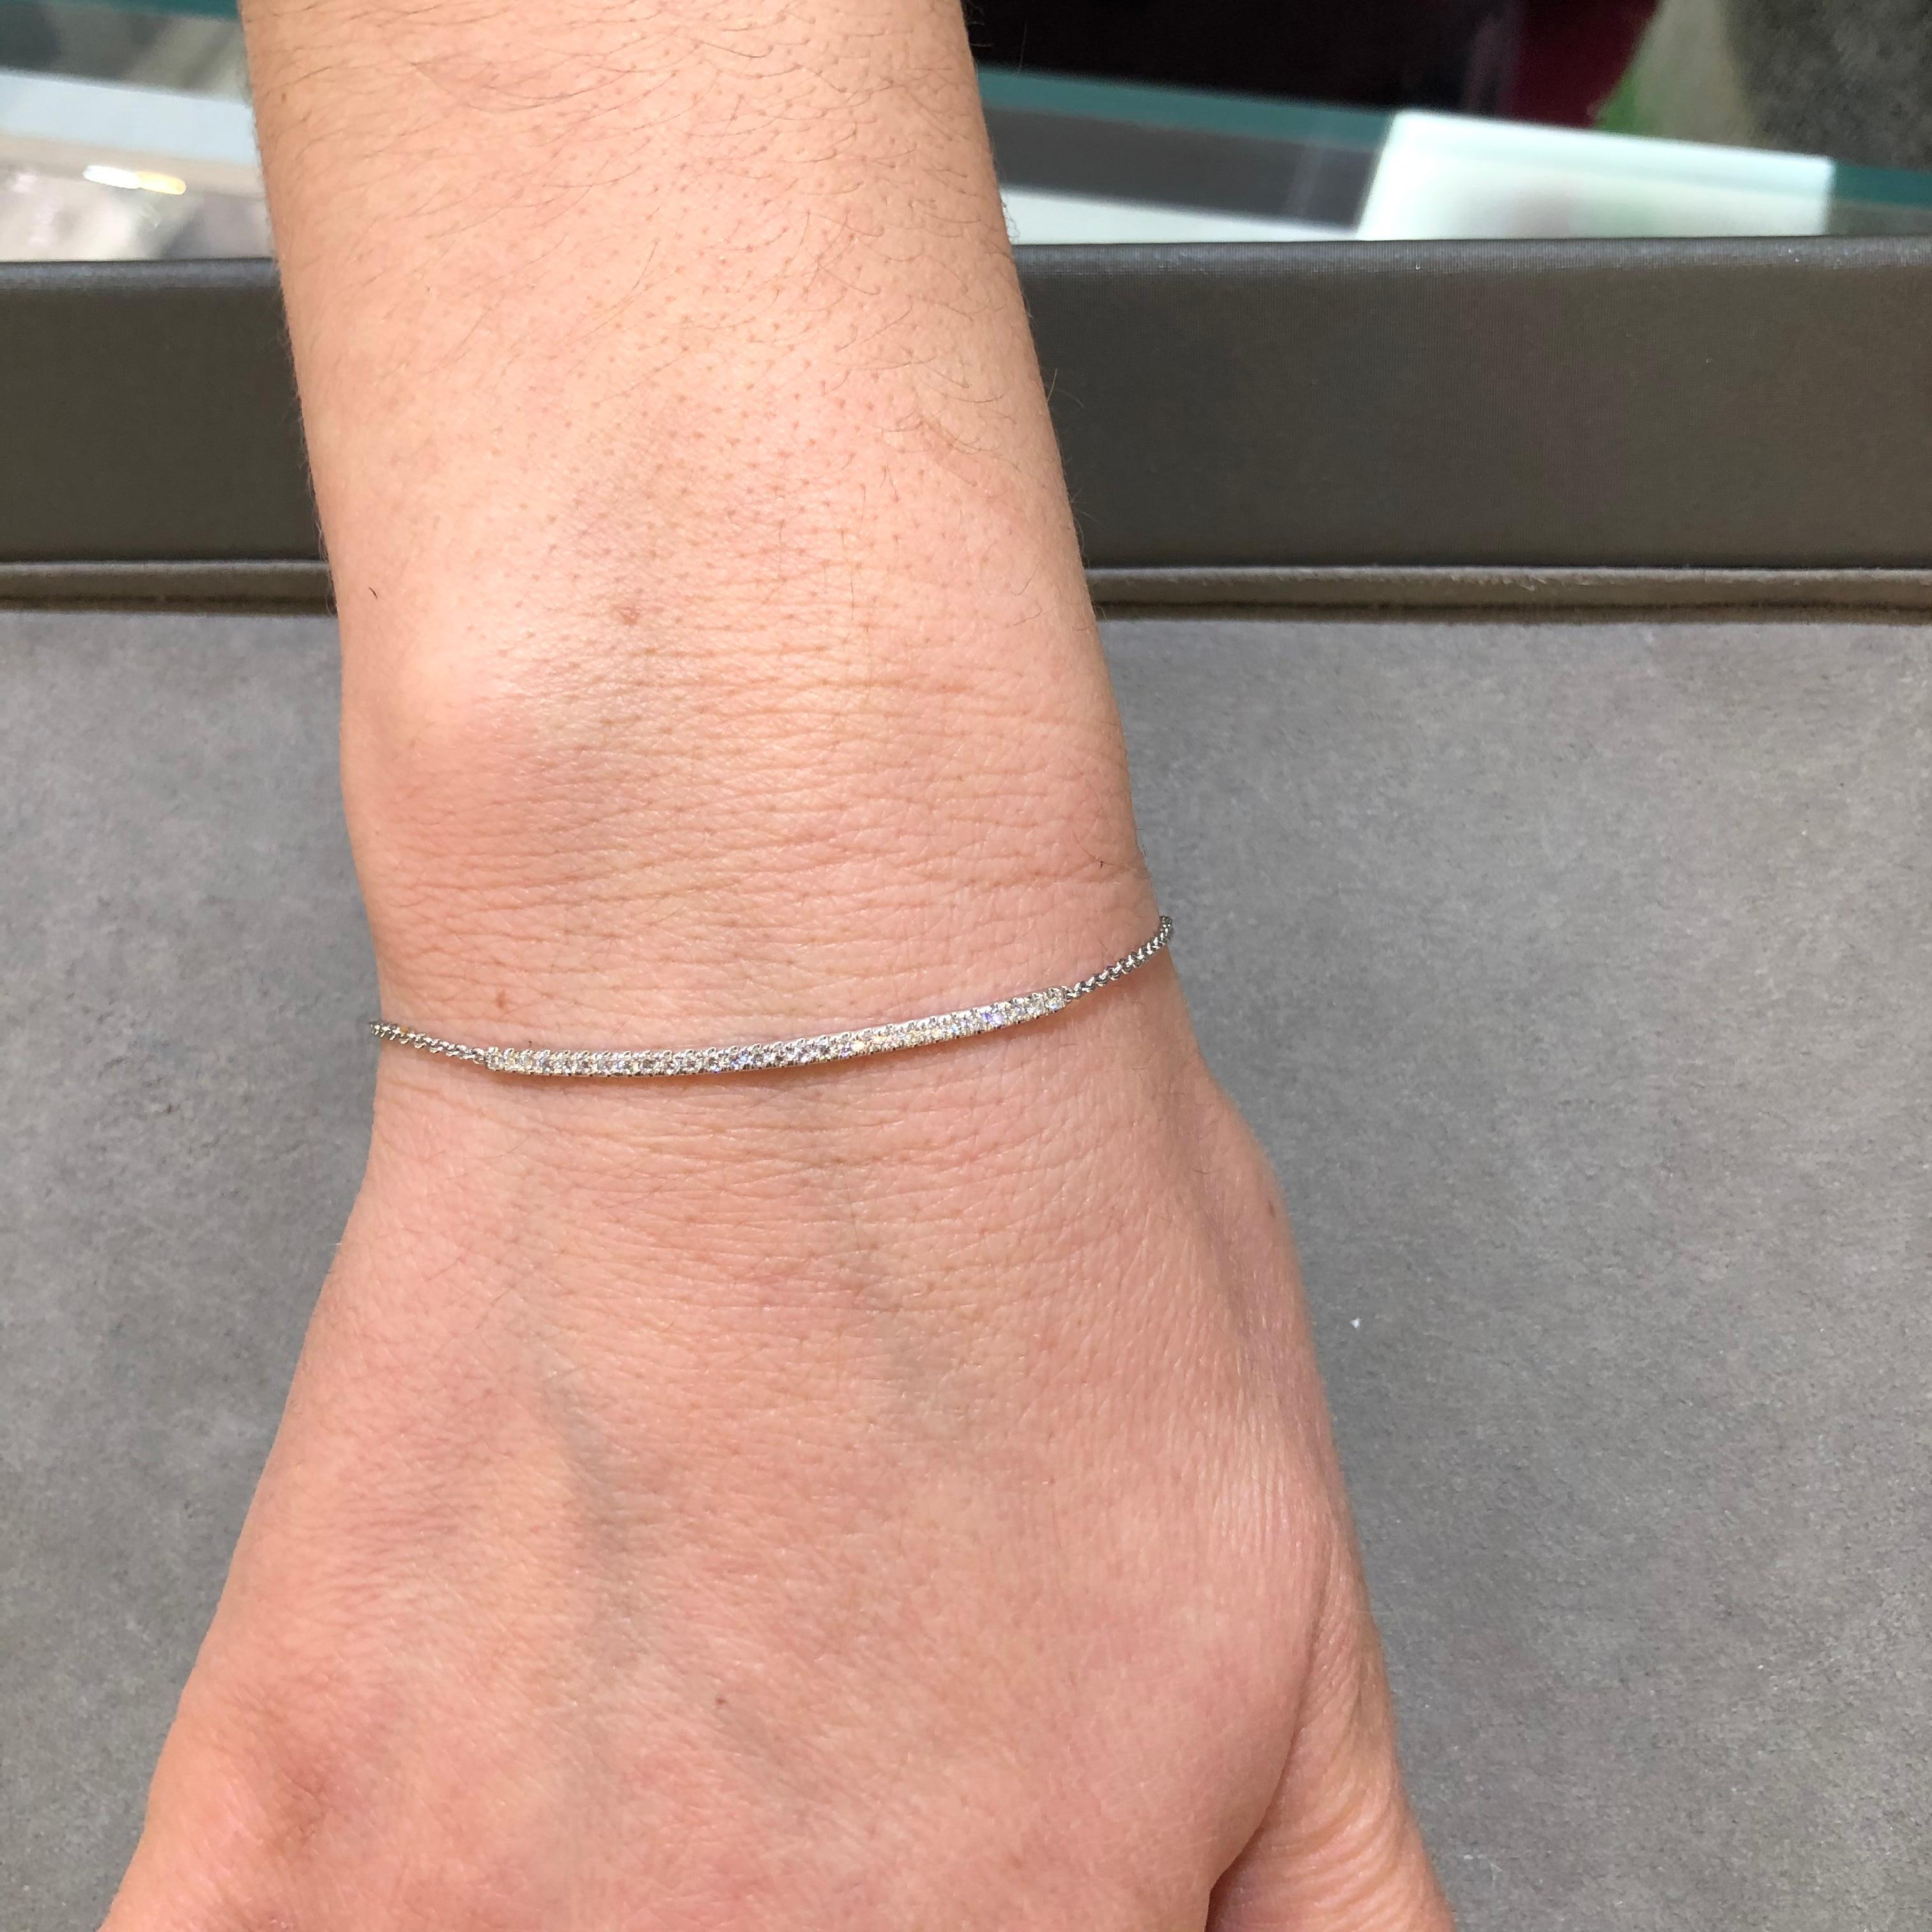 A simple bracelet showcasing a row of brilliant round diamonds weighing 0.31 carats, set in a curved line. Made with 14K White Gold, attached to white gold chain. 

Style available in different price ranges. Prices are based on your selection.